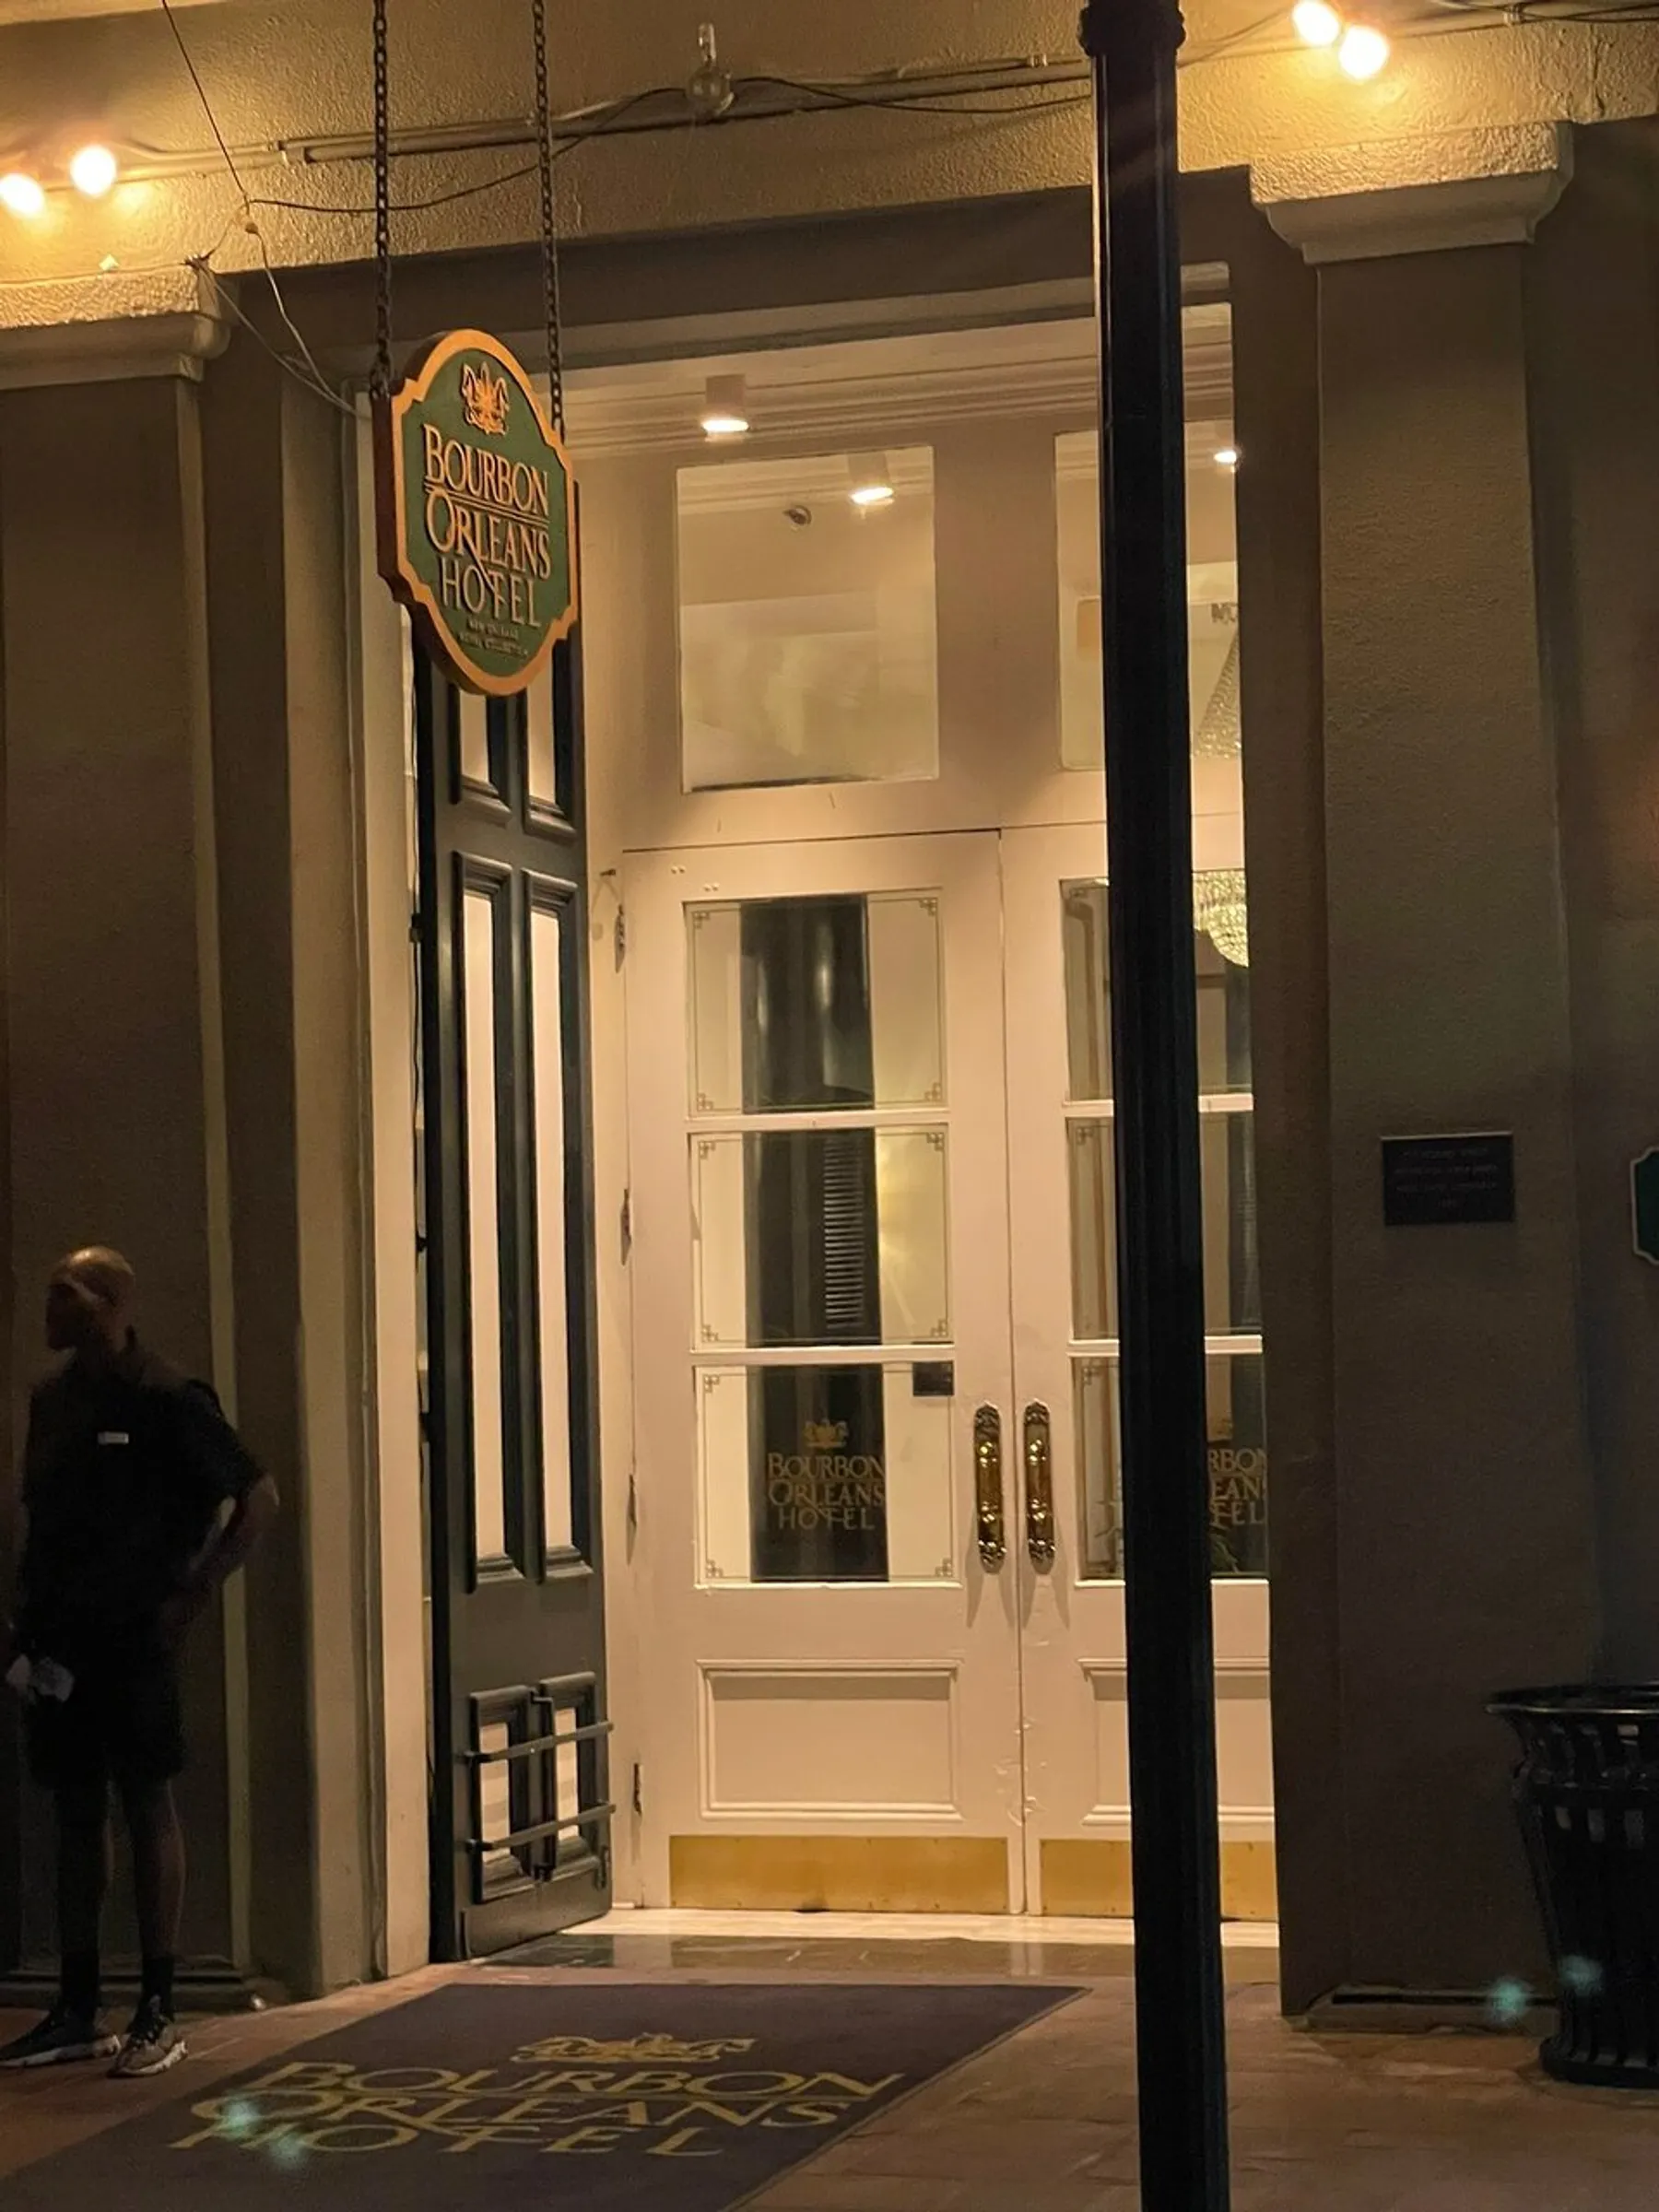 The image shows the illuminated entrance of the Bourbon Orleans Hotel at night, with a person standing by the door and the hotel's ornate sign hanging above.